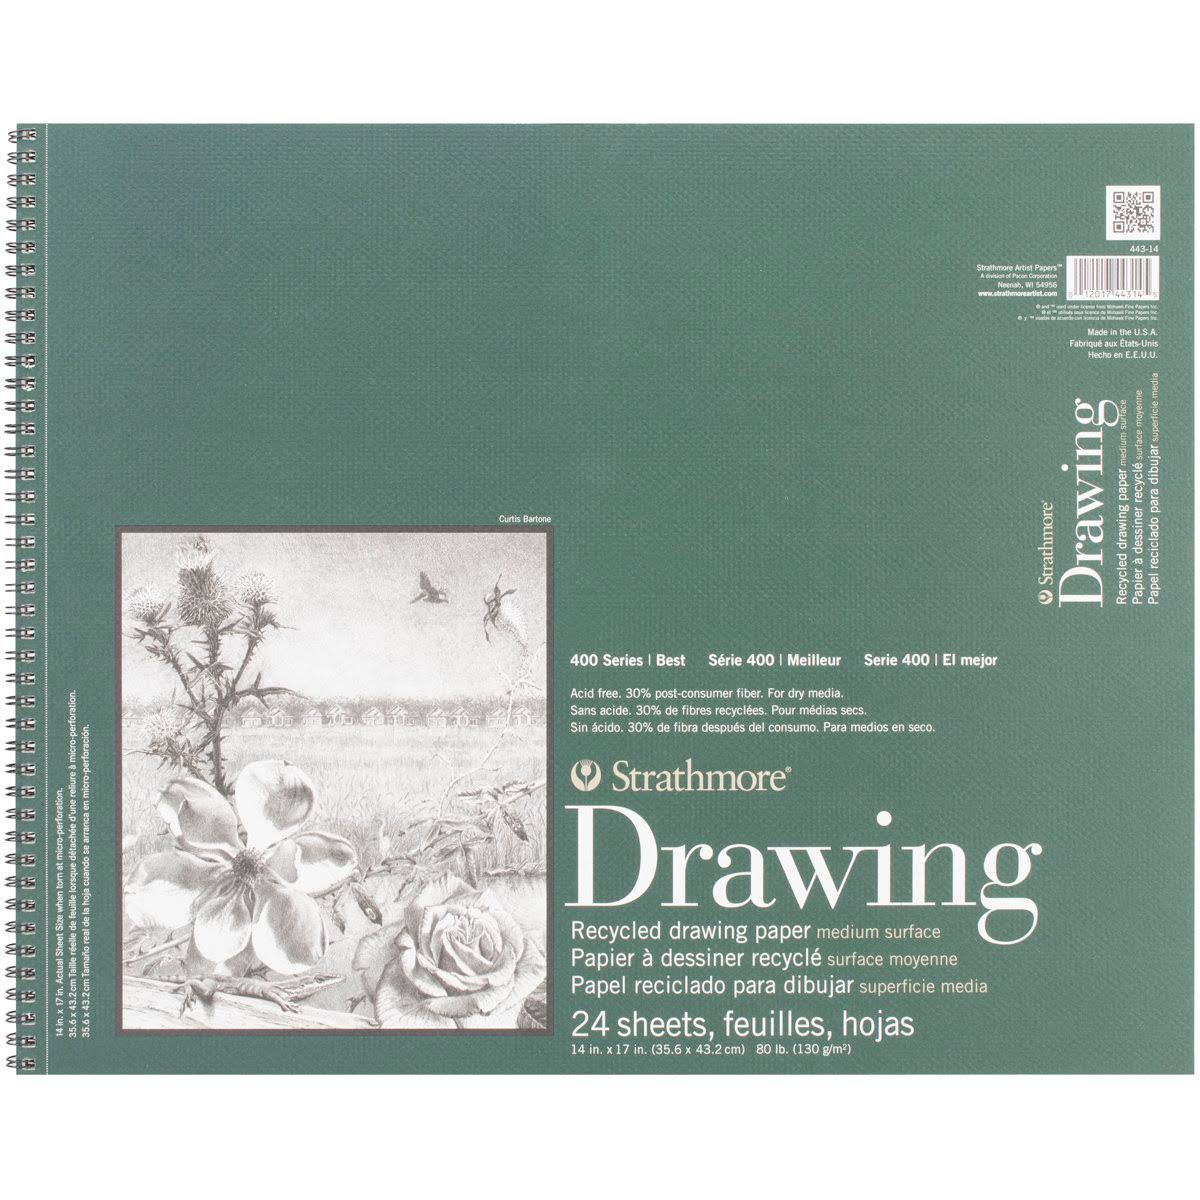 Strathmore 400 Series Wire Bound Recycled Drawing Paper - 14in x 17in, 24 Sheets